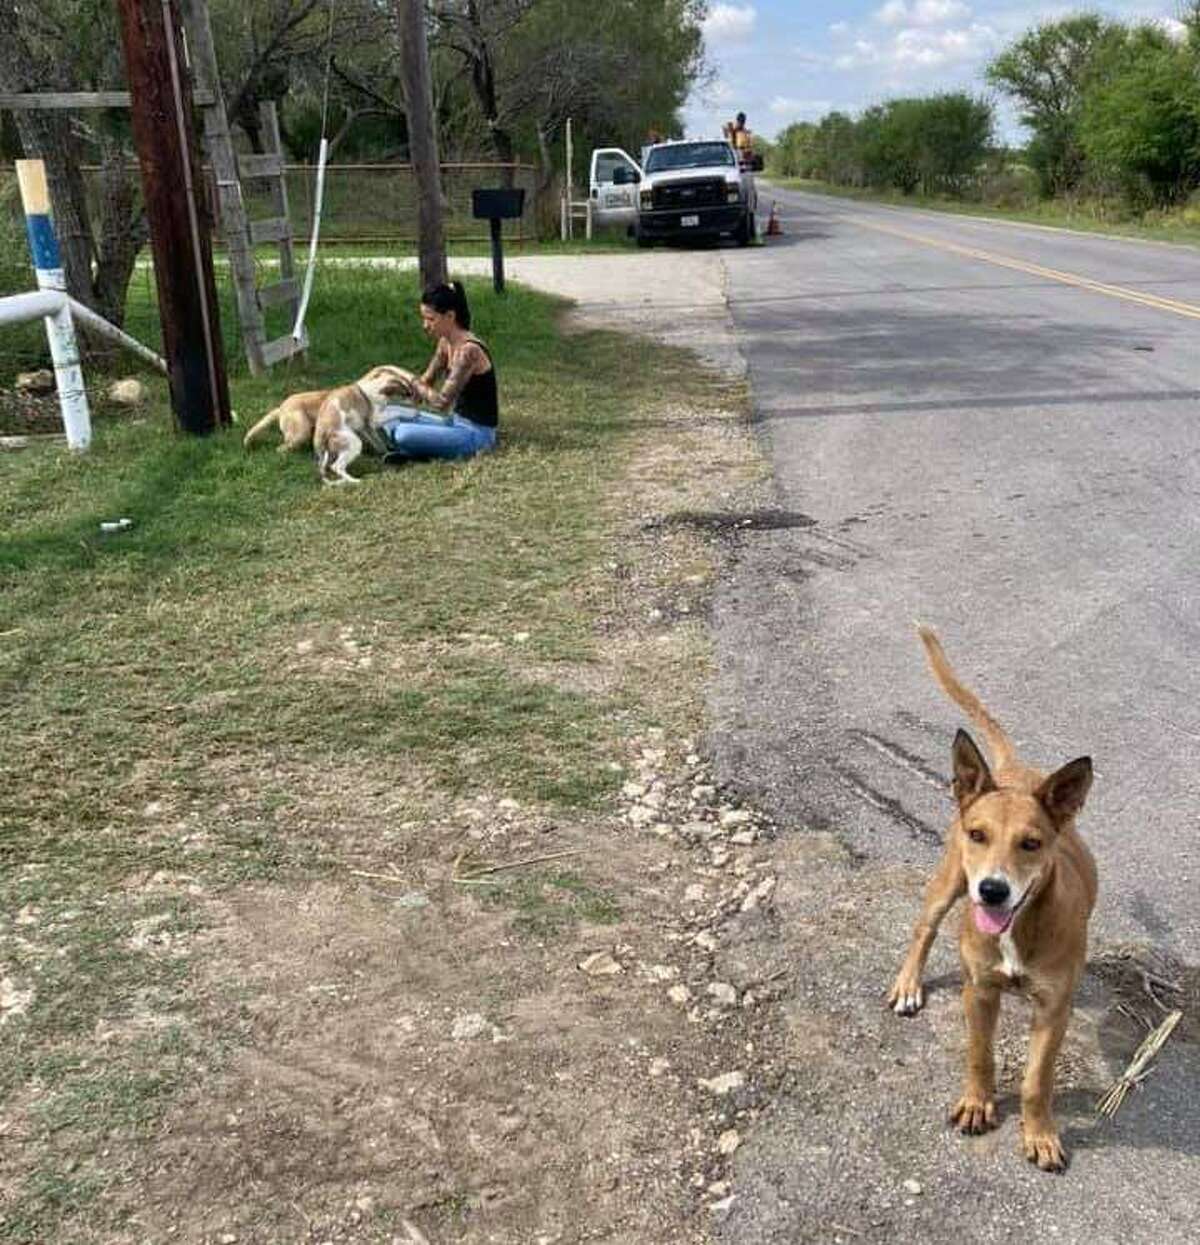 San Antonio resident Jenna Loos uses TikTok to rescue dogs and bring awareness to pet issues in the Alamo City.